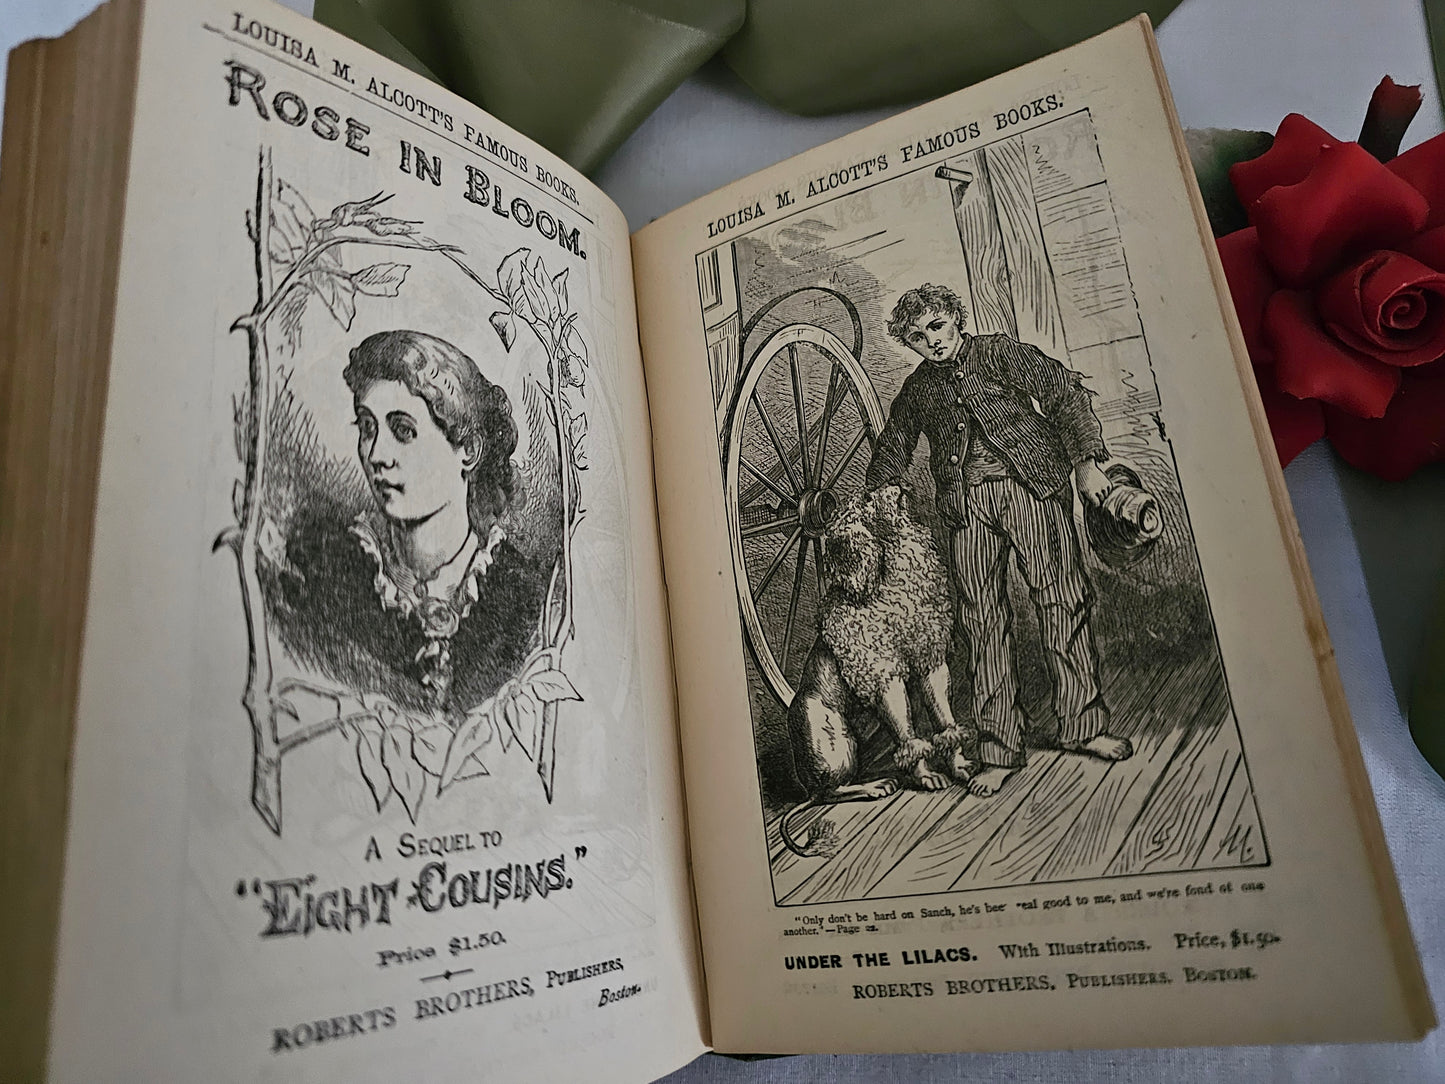 1888 Jo's Boys by Louisa May Alcott / Roberts Brothers, Boston / Very Early Edition, Just Two Years After the First Edition / Good Condition